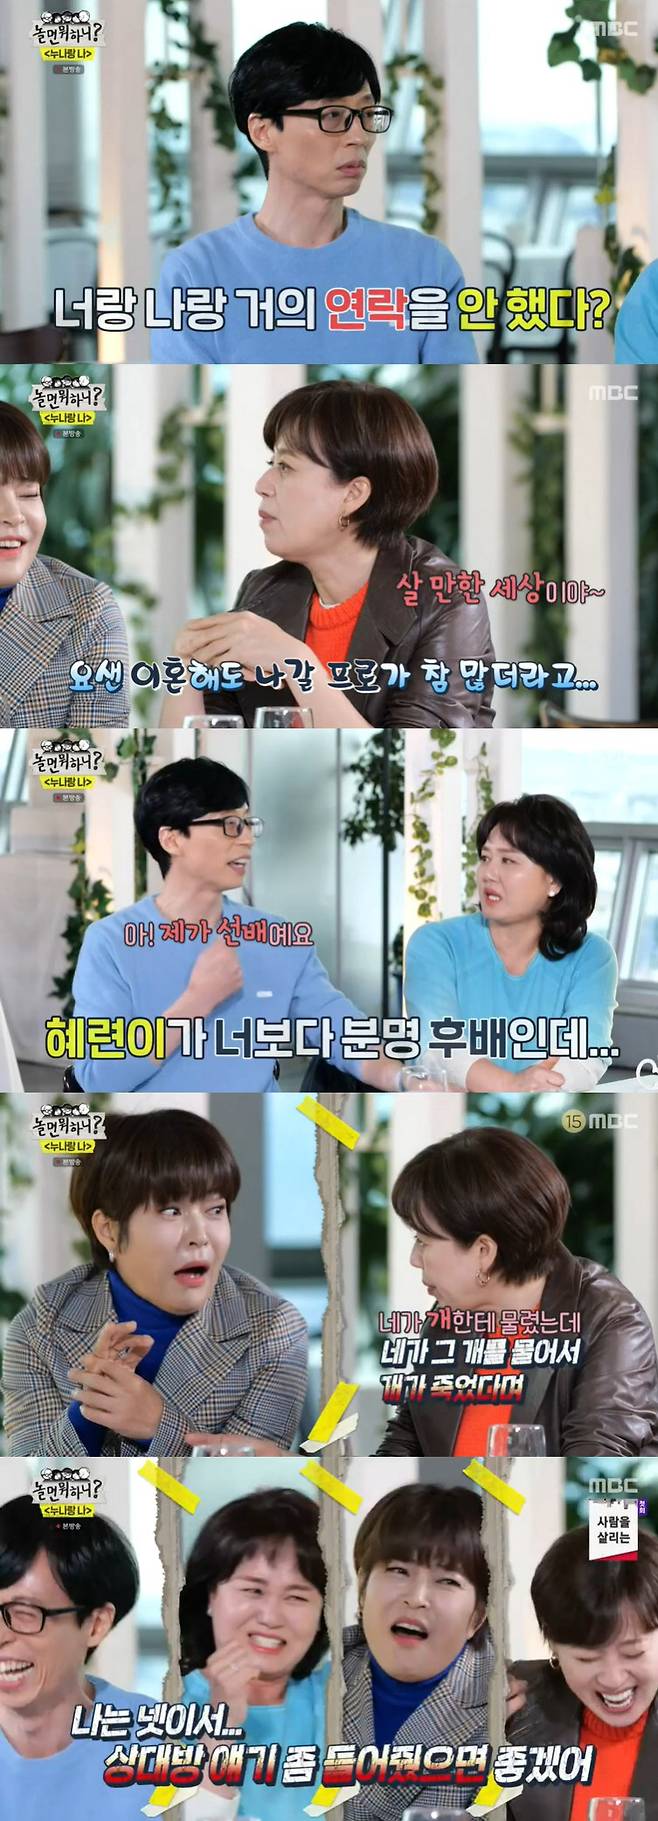 Hangout with Yo Kyeong-shil Lee, Park Mi-sun and Jo Hye-ryun reunited with a legendary talk combination.MBC entertainment program Hangout with Yo broadcast on the 26th predicted Big Match with Running Man.Hangout with Yo, which was tied up with the confirmation of the 19th Corona of Jin-ha.Yoo Jae-Suk said, The Running Man bopil PD has also been confirmed, and Shin Bong-sun complained, But we have been very provocative to our Changhoon PD.Yoo Jae-Suk told Hangout with Yo PD, Chang Hoon, I do not think you are a threat at all, and the members praised Choi Bo-pil PD for his hair.Yoo Jae-Suk called Bopil PD, who was from Yonsei University but Bopil PD was from Korea University. Bopil PD also said, I want to push it once.Is it too funny? she predicted the Big Match of the century.Members of Hangout with Yo who were worried about items due to the absence of Jin-ha. Haha told Yoo Jae-Suk, Lets go to your bankbook once.Lets go to the bank and see how many zeros we have from the back. Shin Bong-sun said, Lets give 100 million won to the closest person. The Americas also stepped up: The Americas heard rumors that there were hundreds of billions, and Yoo Jae-Suk was ridiculous.The Americas asked, Do not you count money all day? Yoo Jae-Suk laughed, saying, Do you want to count money on the floor and count it every night?Where Yoo Jae-Suk went, there was a legendary three wheel combination.On that day, too, Yoo Jae-Suk became the youngest among Kyeong-shil Lee, Jo Hye-ryun and Park Mi-sun.The sisters, who have met for a long time, still surprised Yoo Jae-Suk with Maramat Talk, Park Mi-sun said, Foredays there is a lot to go out even if they divorce.Its a world to live in, and Kyeong-shil Lee laughed, saying, I would have lived alone if I knew this. Jo Hye-ryun operated on a scar with a dog bite in the past at the suggestion of Kyeong-shil Lee; Jo Hye-ryun said: My sister points out a lot.But eventually, my sister is right. I do not want to hear it. Yoo Jae-Suk welcomed the three sisters, saying, I do not have many brothers, but my sisters are not real. I call the word sister for a long time.The four of them had gone on a detailed trip with Lee Hye-jae and Jin-ha.That was just the time for Park Jae-seok to get noticed, Kyeong-shil Lee recalled.Yoo Jae-Suk laughed as he said, Why is it so fun to talk about the same thing when we gather?Yoo Jae-Suk also said, My sister tried to tie me with silver. Park Jae-seok, youre a little weird with silver these days. Silver rides with us.I was so close, she recalled.Jo Hye-ryun sang Anaana as a celebration at Lee Kyung-gyus daughter Lee Ye-rims wedding, with Jo Hye-ryun saying, At first I hated it. Is there something thats going to ruin the wedding?But he does not like me. He told me to send MR later. 